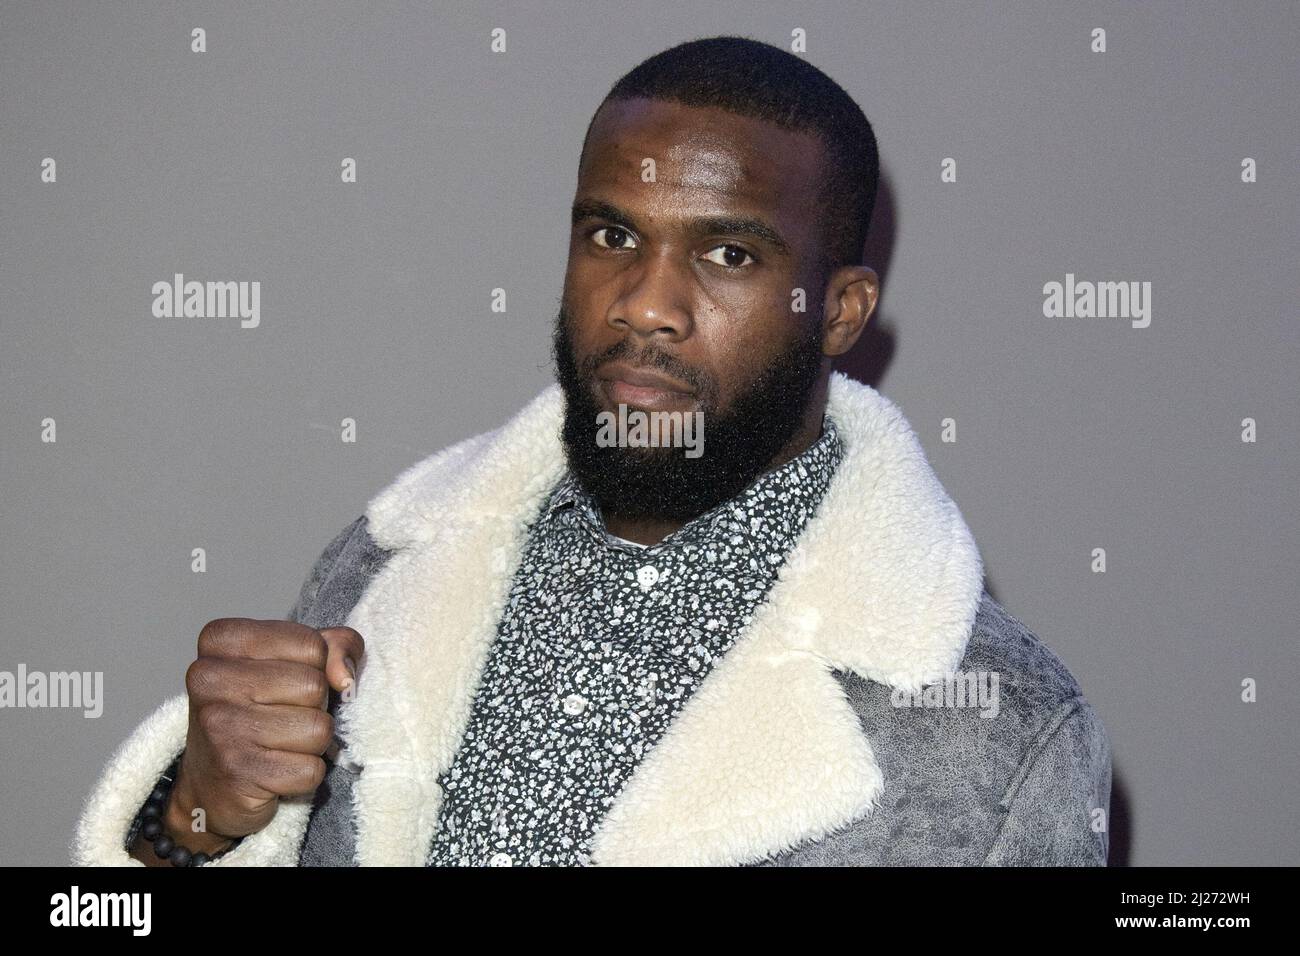 Joel Kouadja attending the Bellator MMA Press Conference at the Accor Arena Bercy in Paris, France on March 30, 2022. Photo by Aurore Marechal/ABACAPRESS.COM Stock Photo